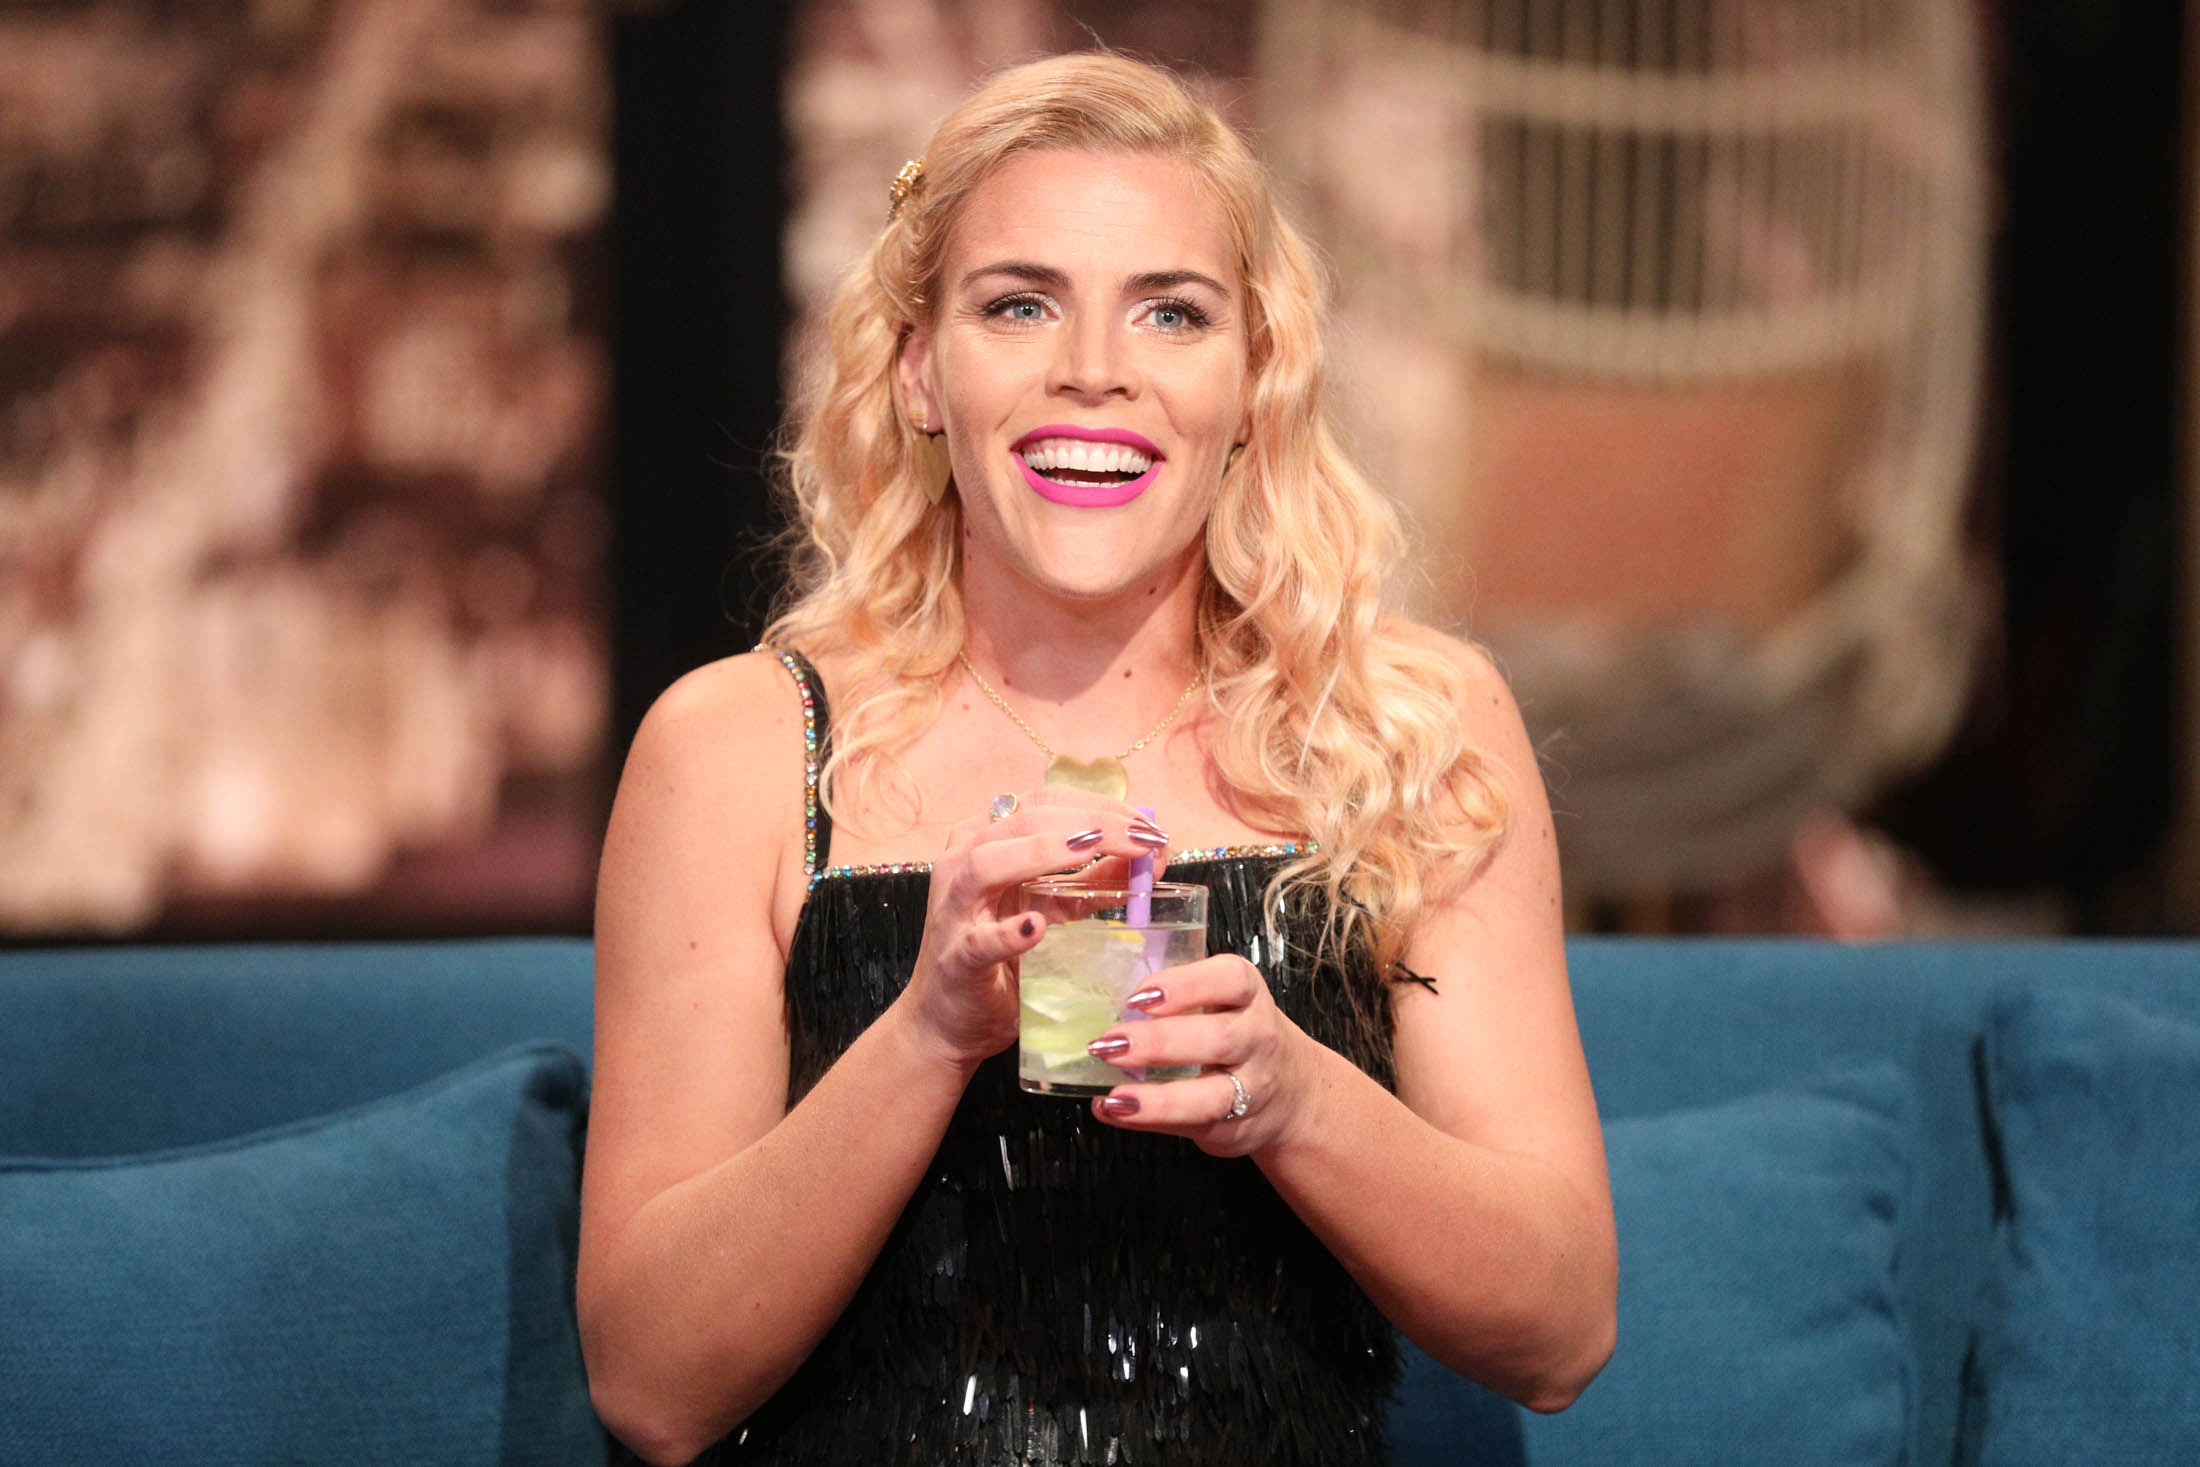 Busy Philipps Travel Tips: Bring the Kids, Skip the Concierge - Bloomberg